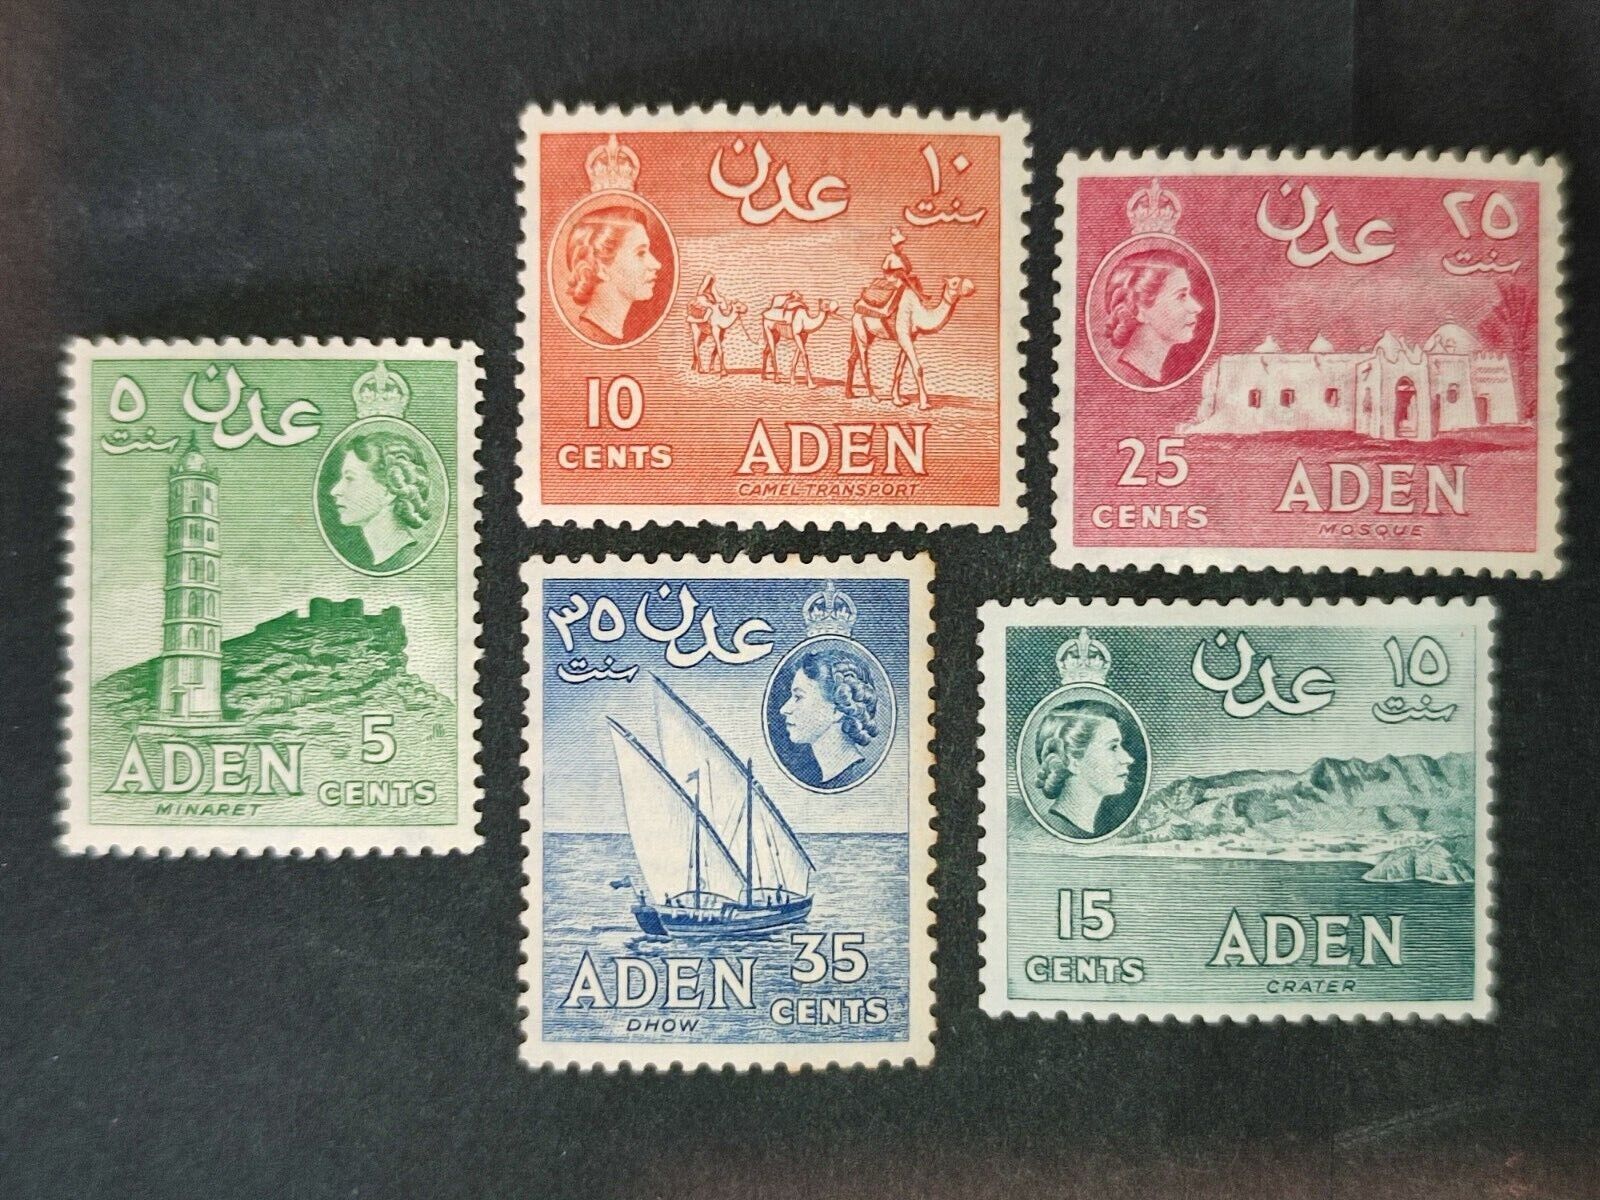 Aden 1953-59 Aden Landscapes 5 Values From The Set Mnh Perfectly Centered